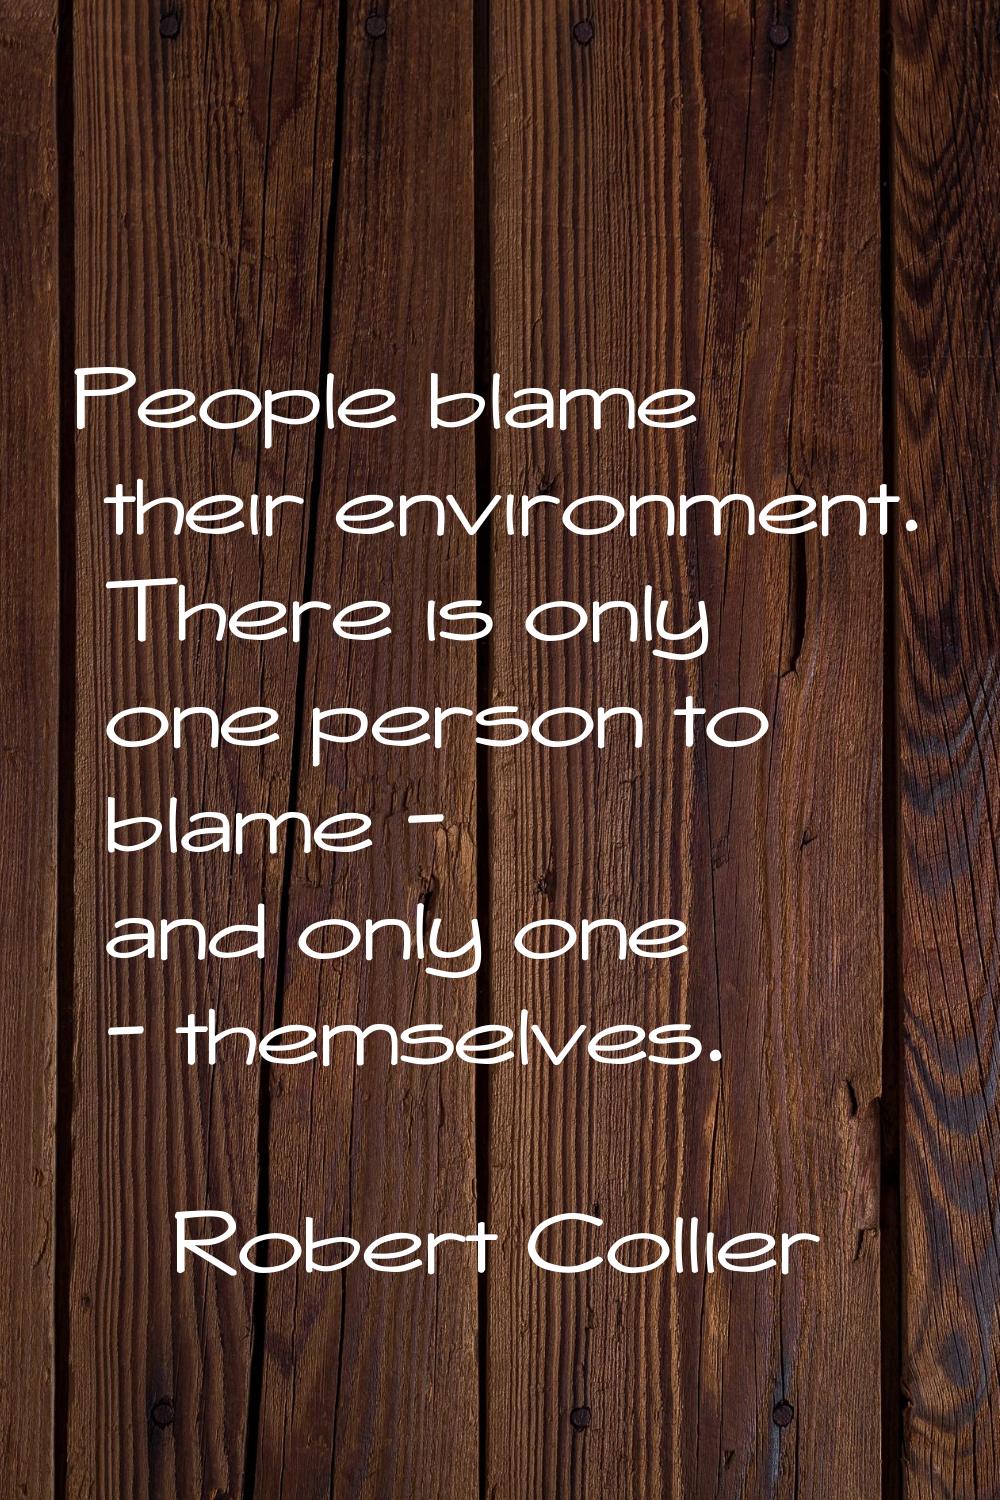 People blame their environment. There is only one person to blame - and only one - themselves.